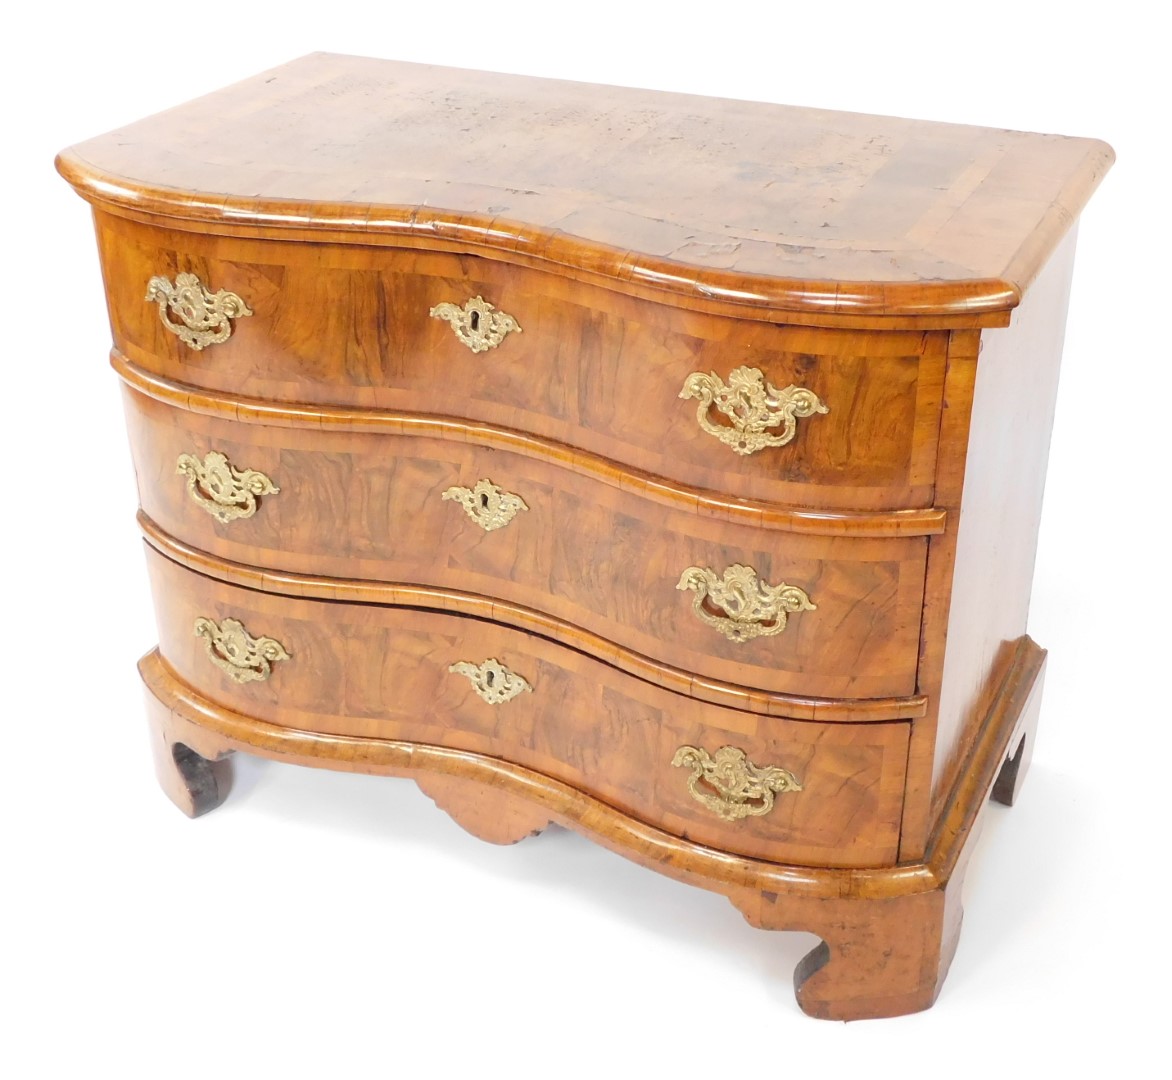 An early 19thC Dutch walnut serpentine chest, with deep cross banded and moulded top over three draw